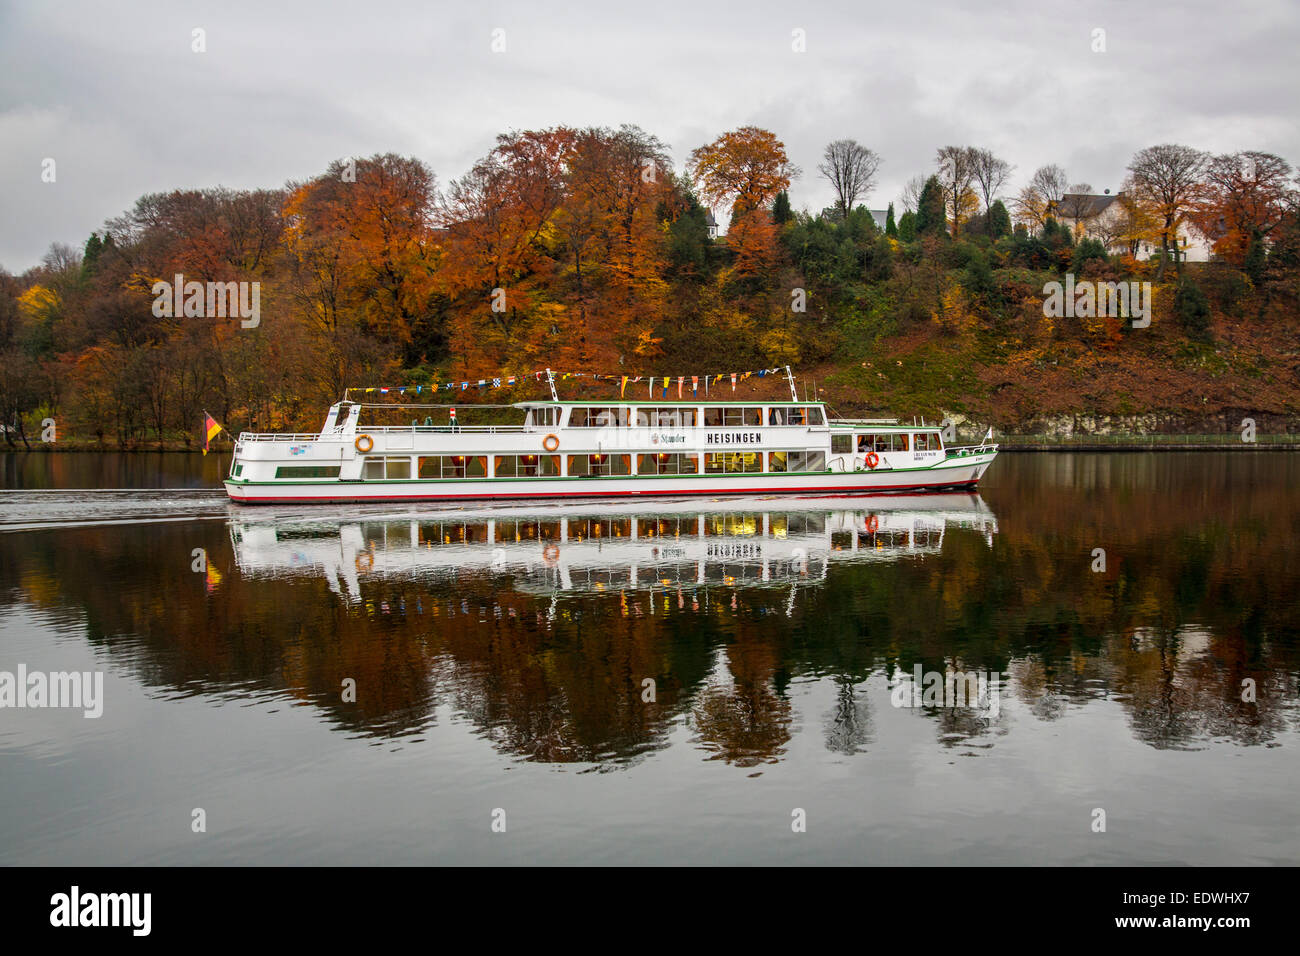 Boat trip on the Baldeney See lake, in fall, Essen, Germany, Stock Photo